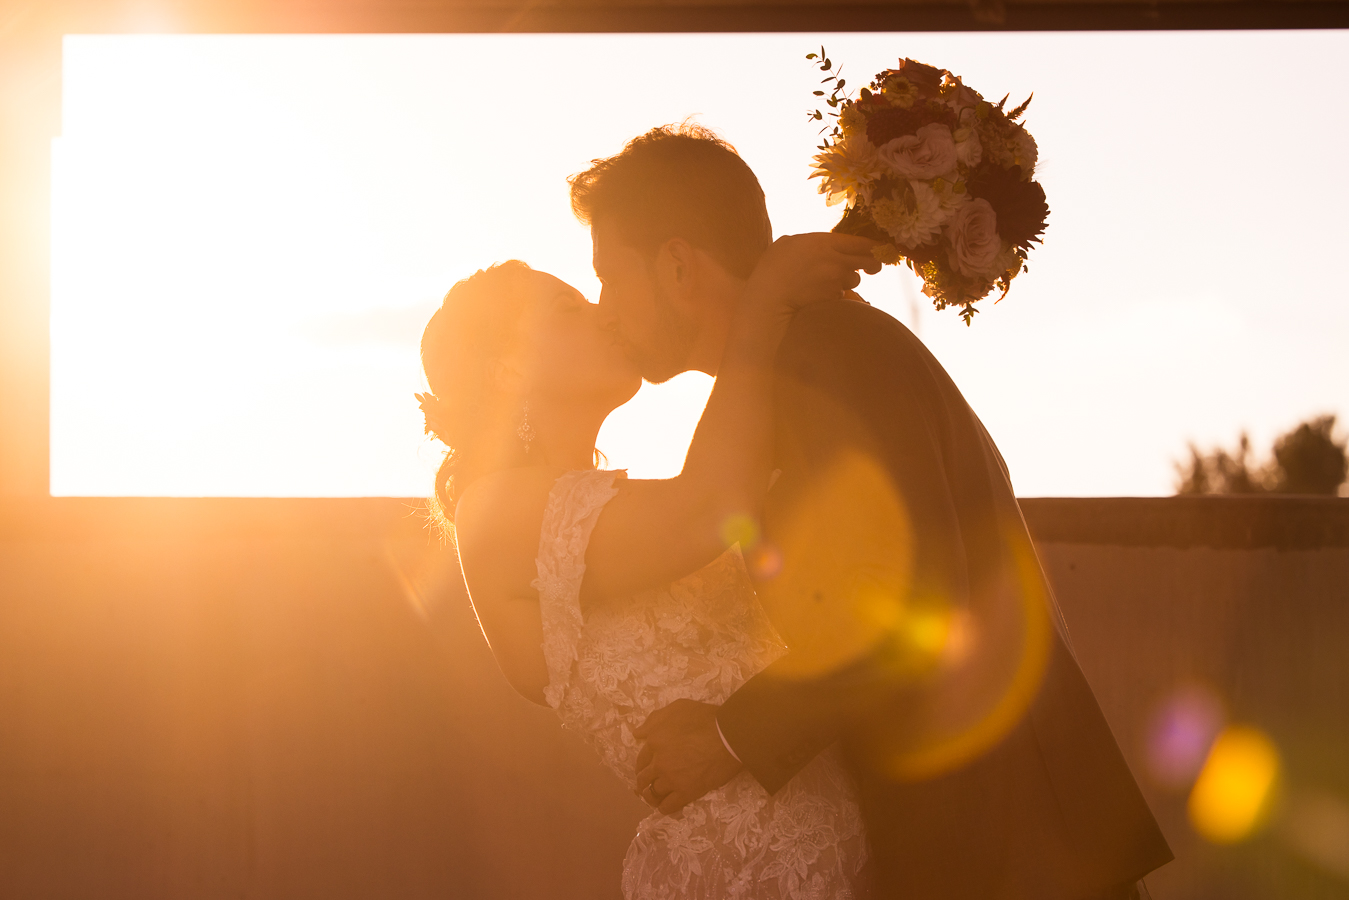 central pa wedding photographer, lisa rhinehart, captures this image of the bride and groom as they kiss each other during this golden hour sunset at alpine acres in warfordsburg, pa 